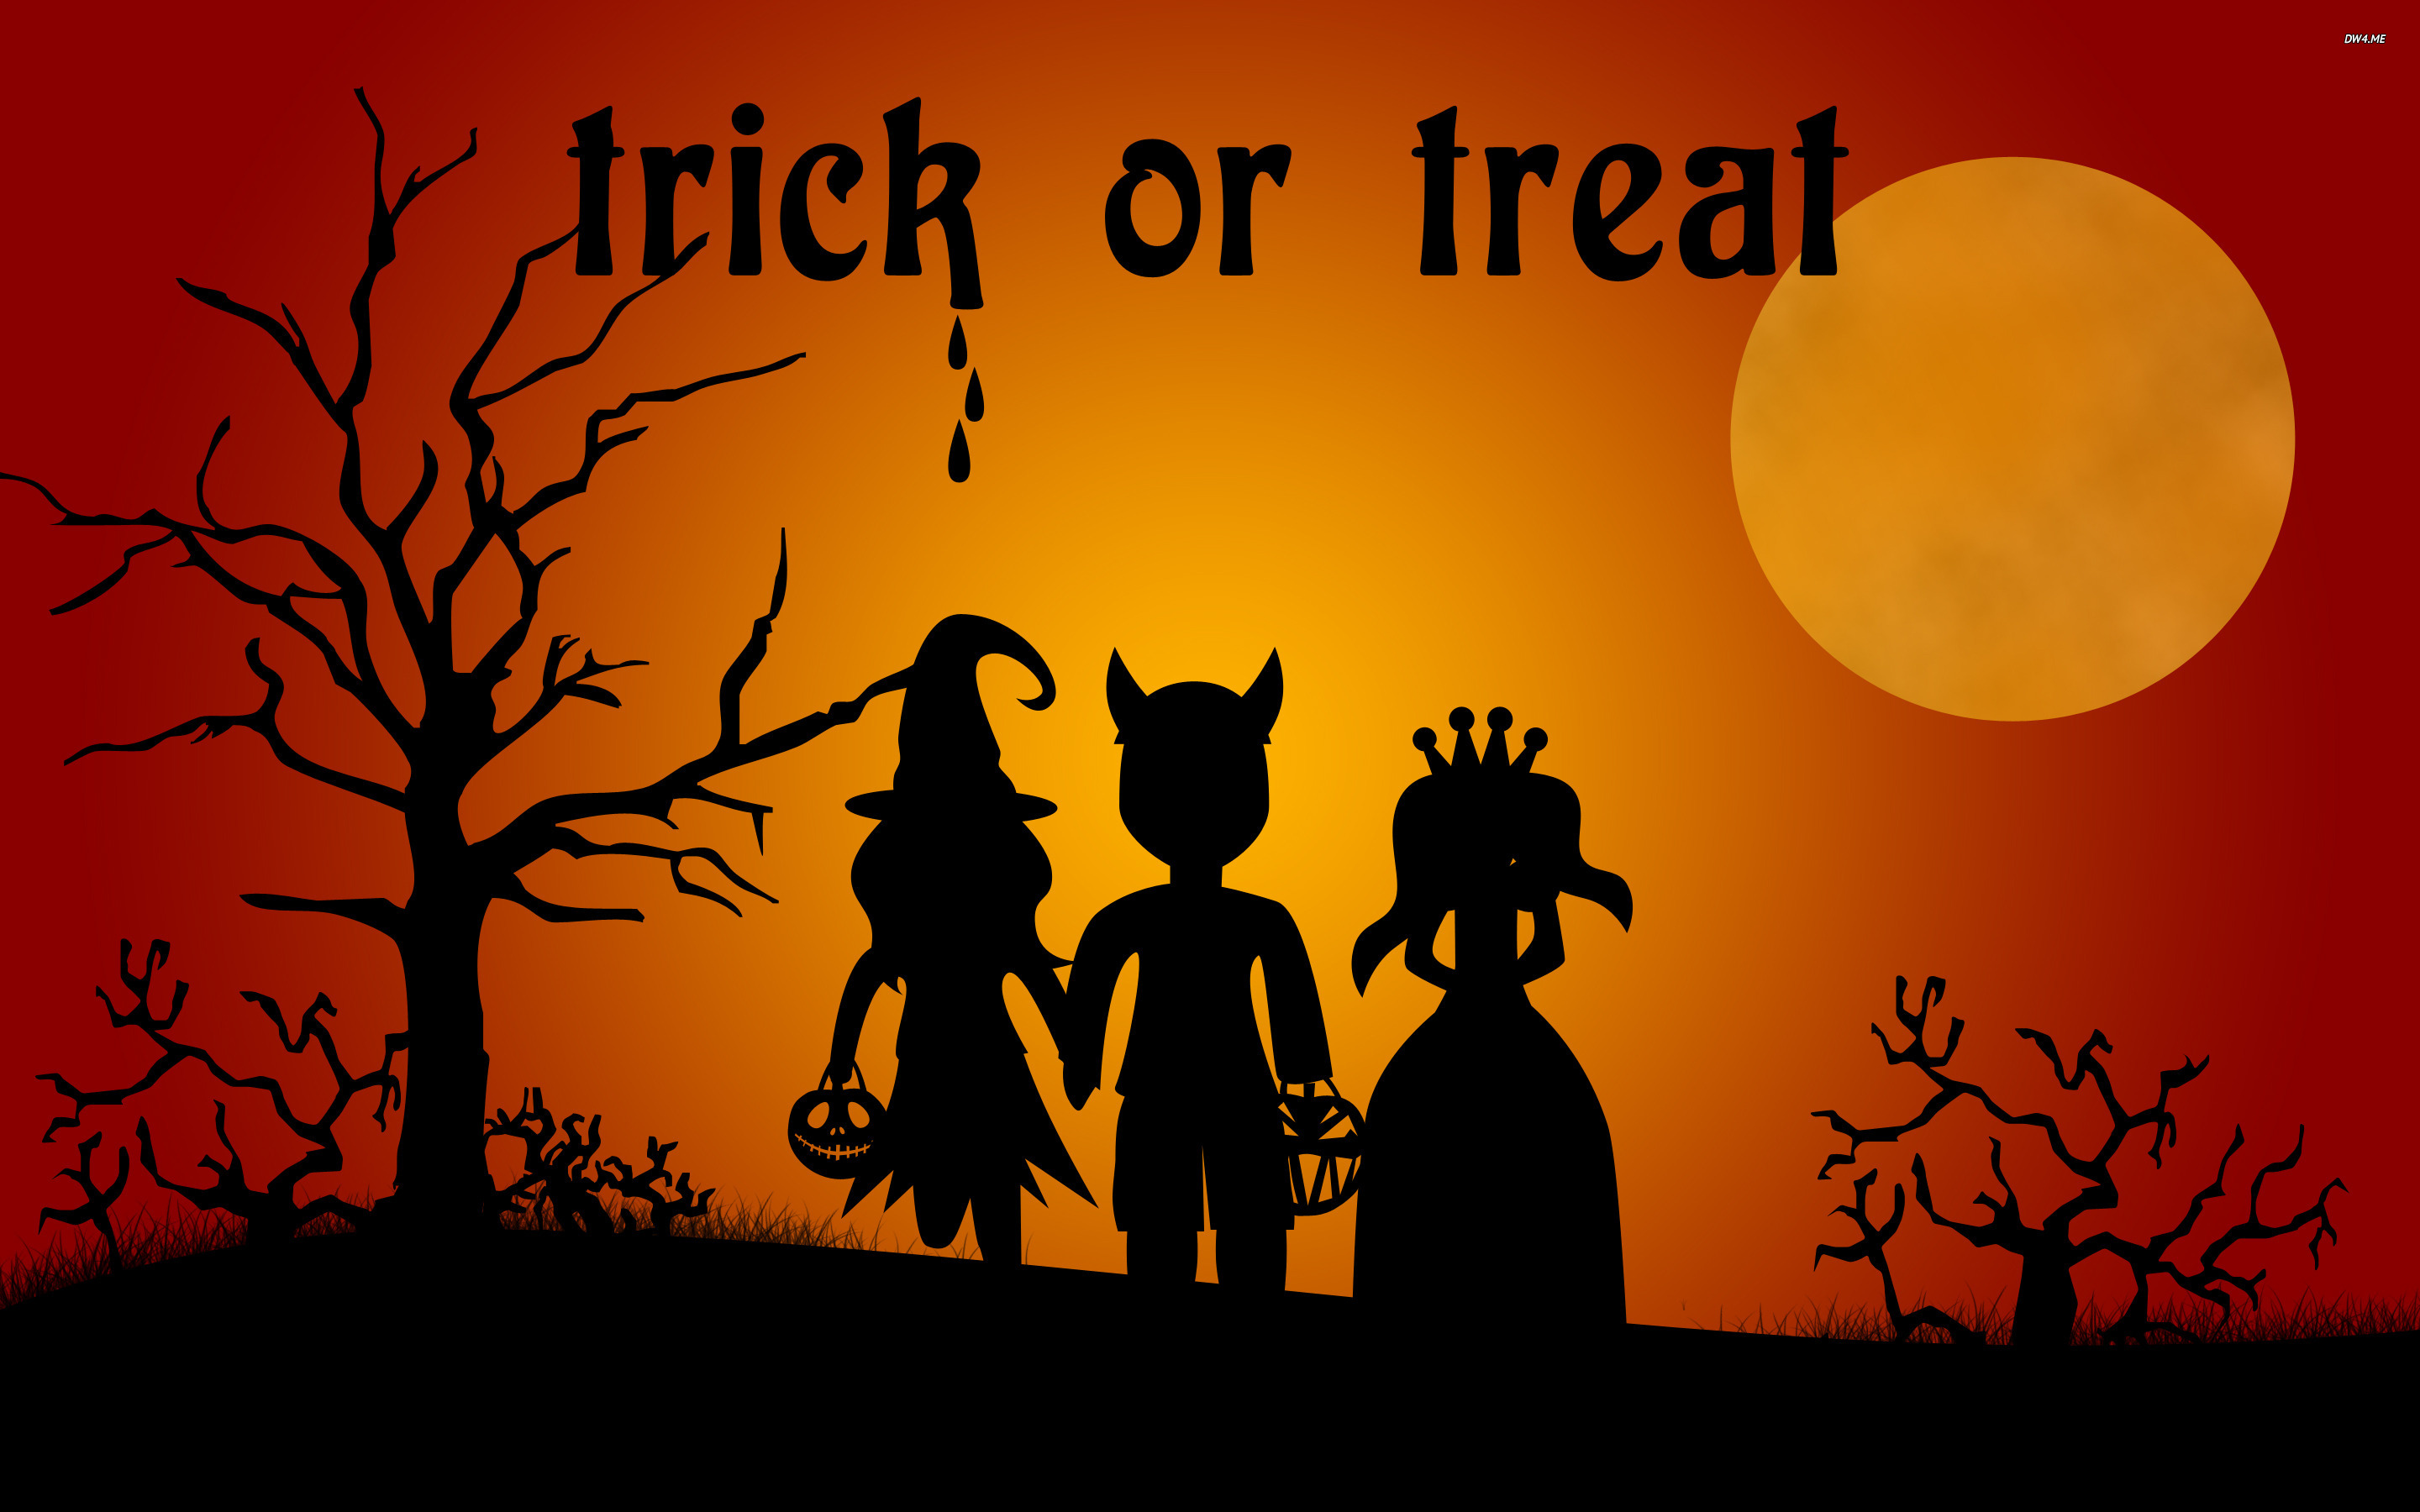 Trick or treat wallpaper - Holiday wallpapers - - Images